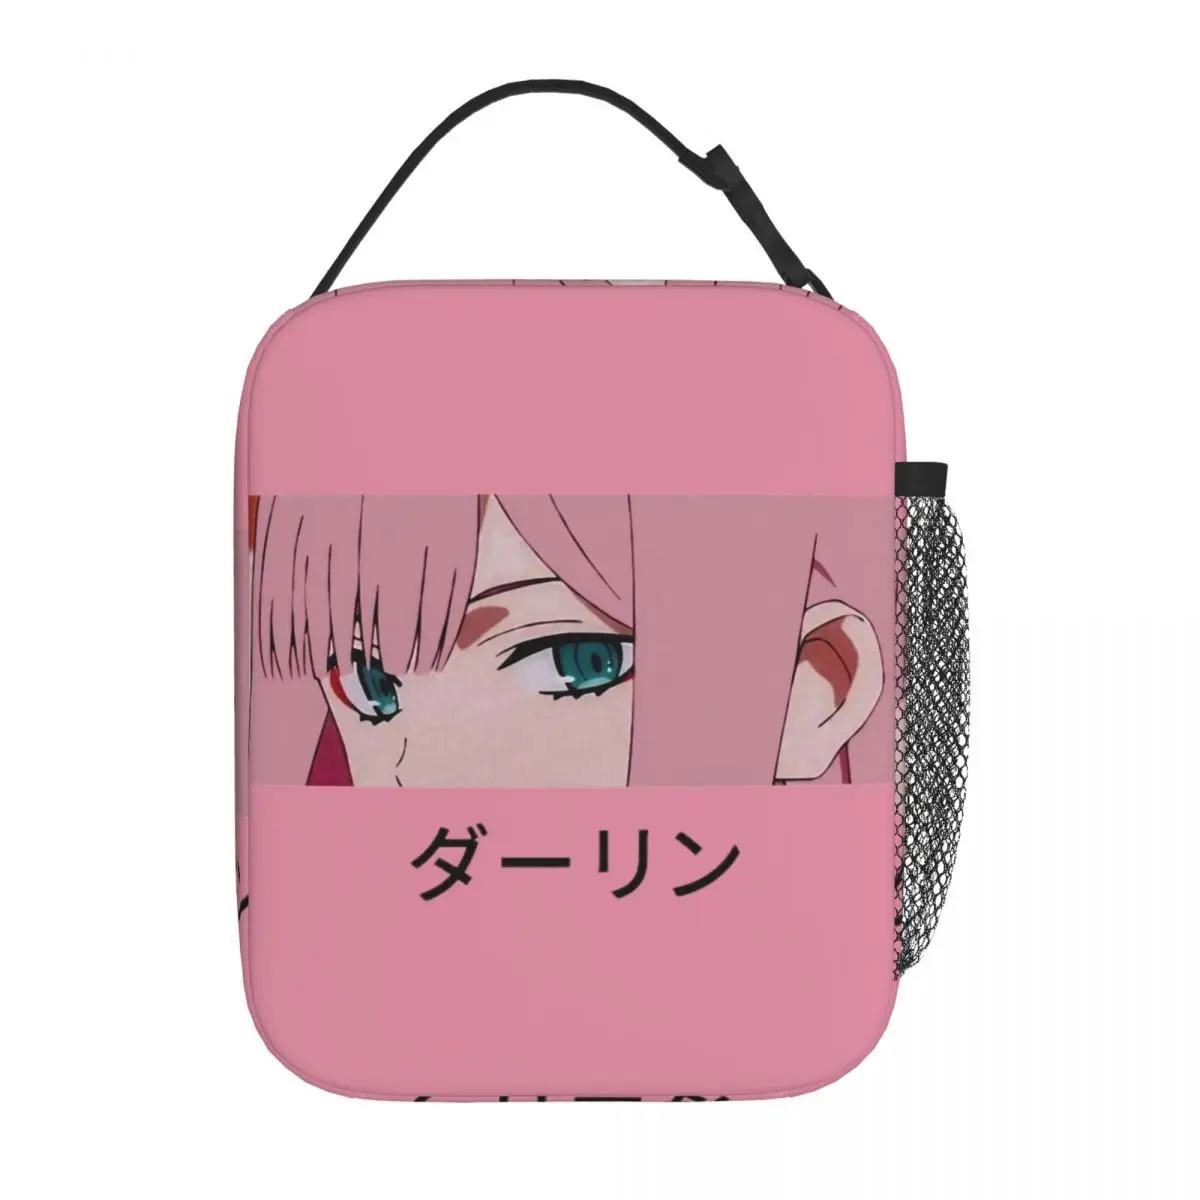 

Zero Two Darling In The Franxx 02 Merch Insulated Lunch Bags For Office Anime Storage Bag Leakproof Cooler Thermal Lunch Boxes